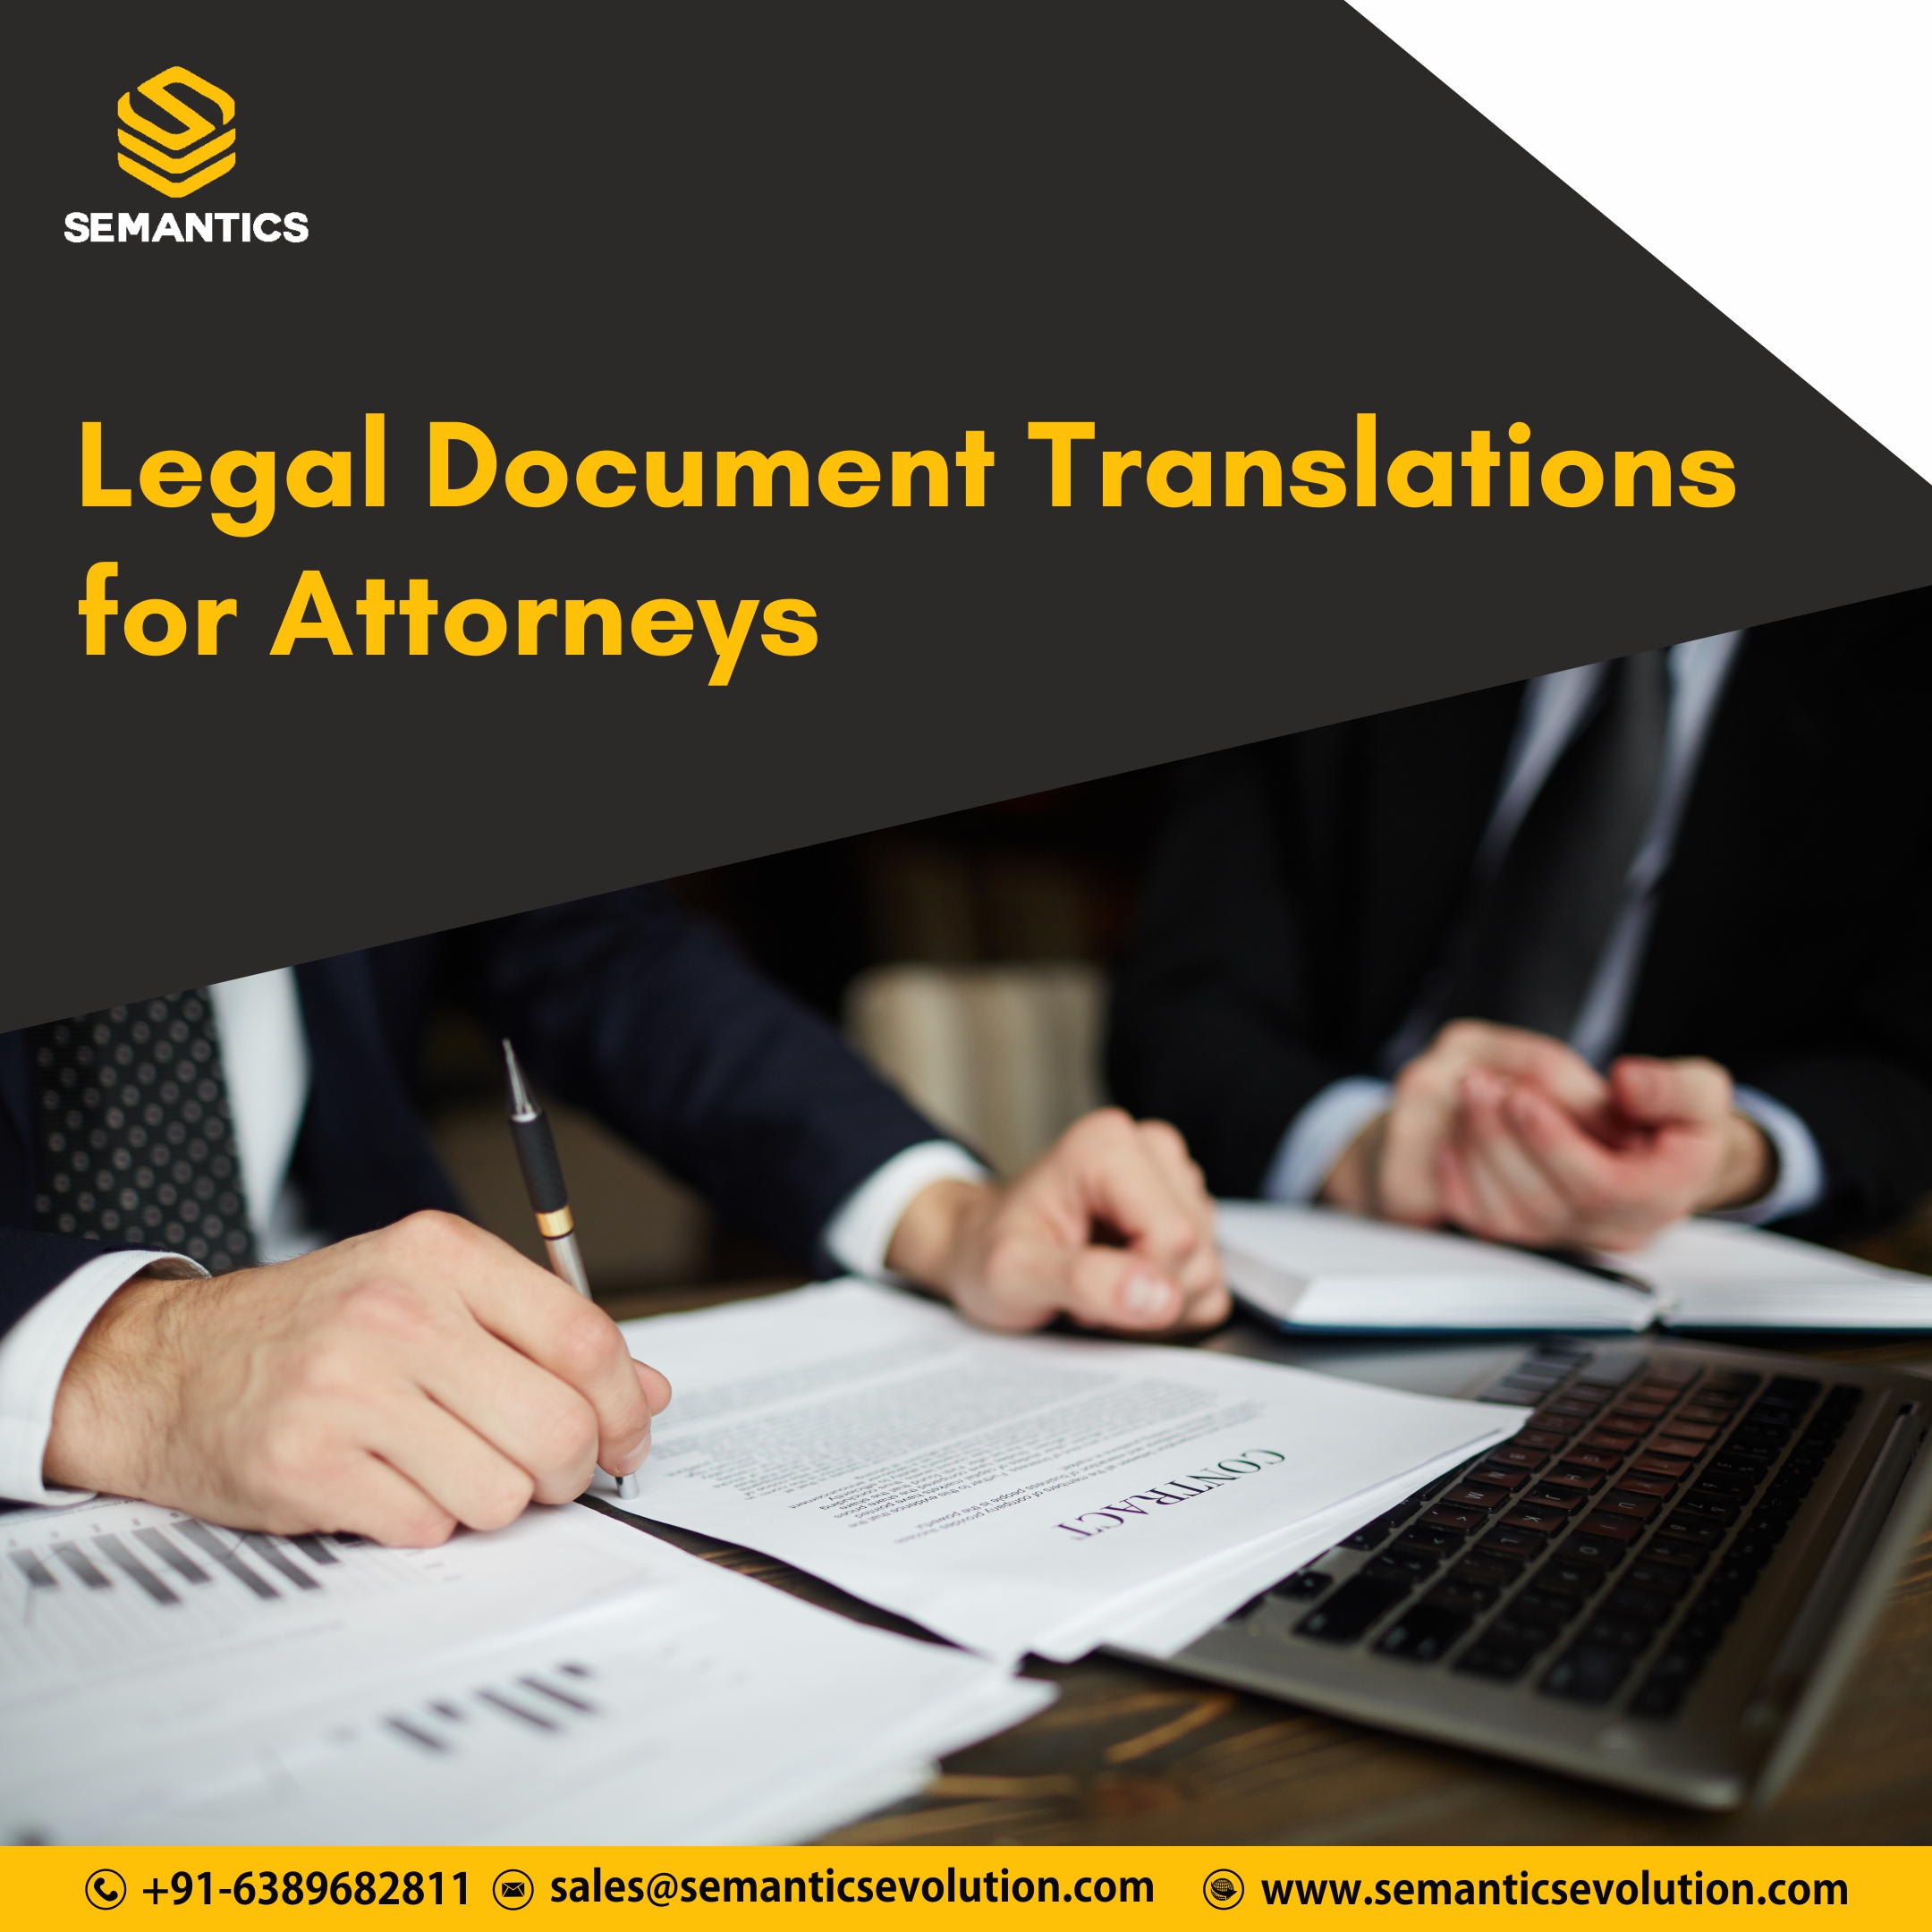 Legal Document Translations for Attorneys